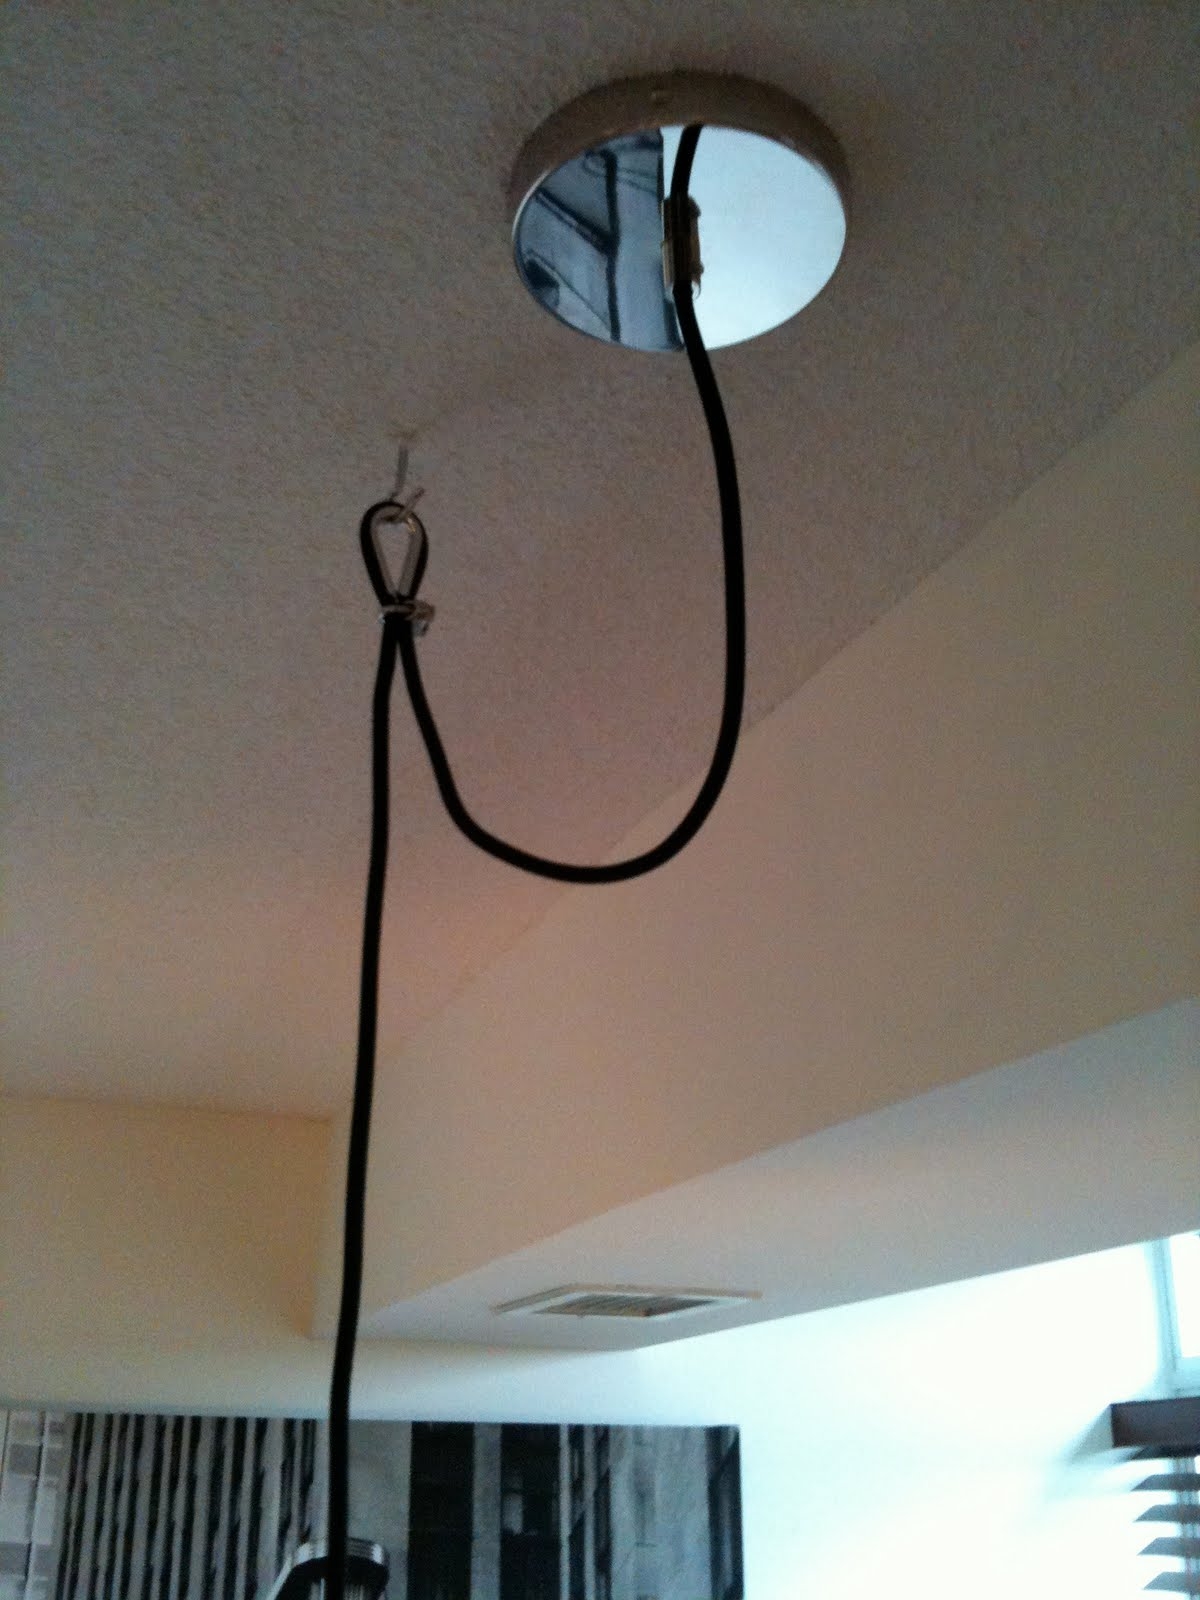 Hanging A Light From Concrete Ceilingswag a pendant light from concrete ceiling in a condo tower bad